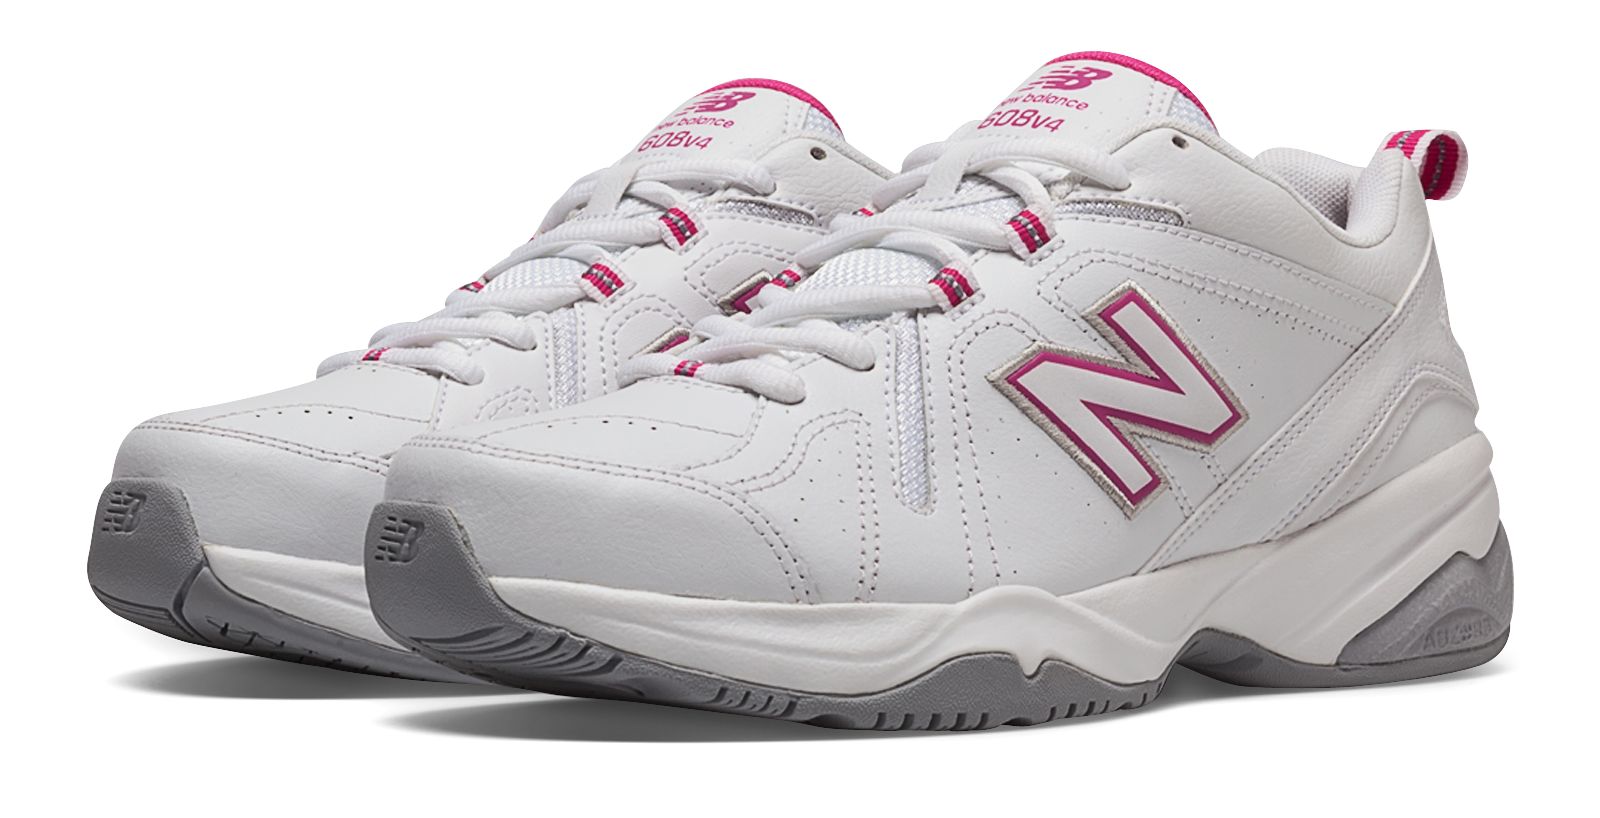 Off on WX608V4P at Joe's New Balance Outlet